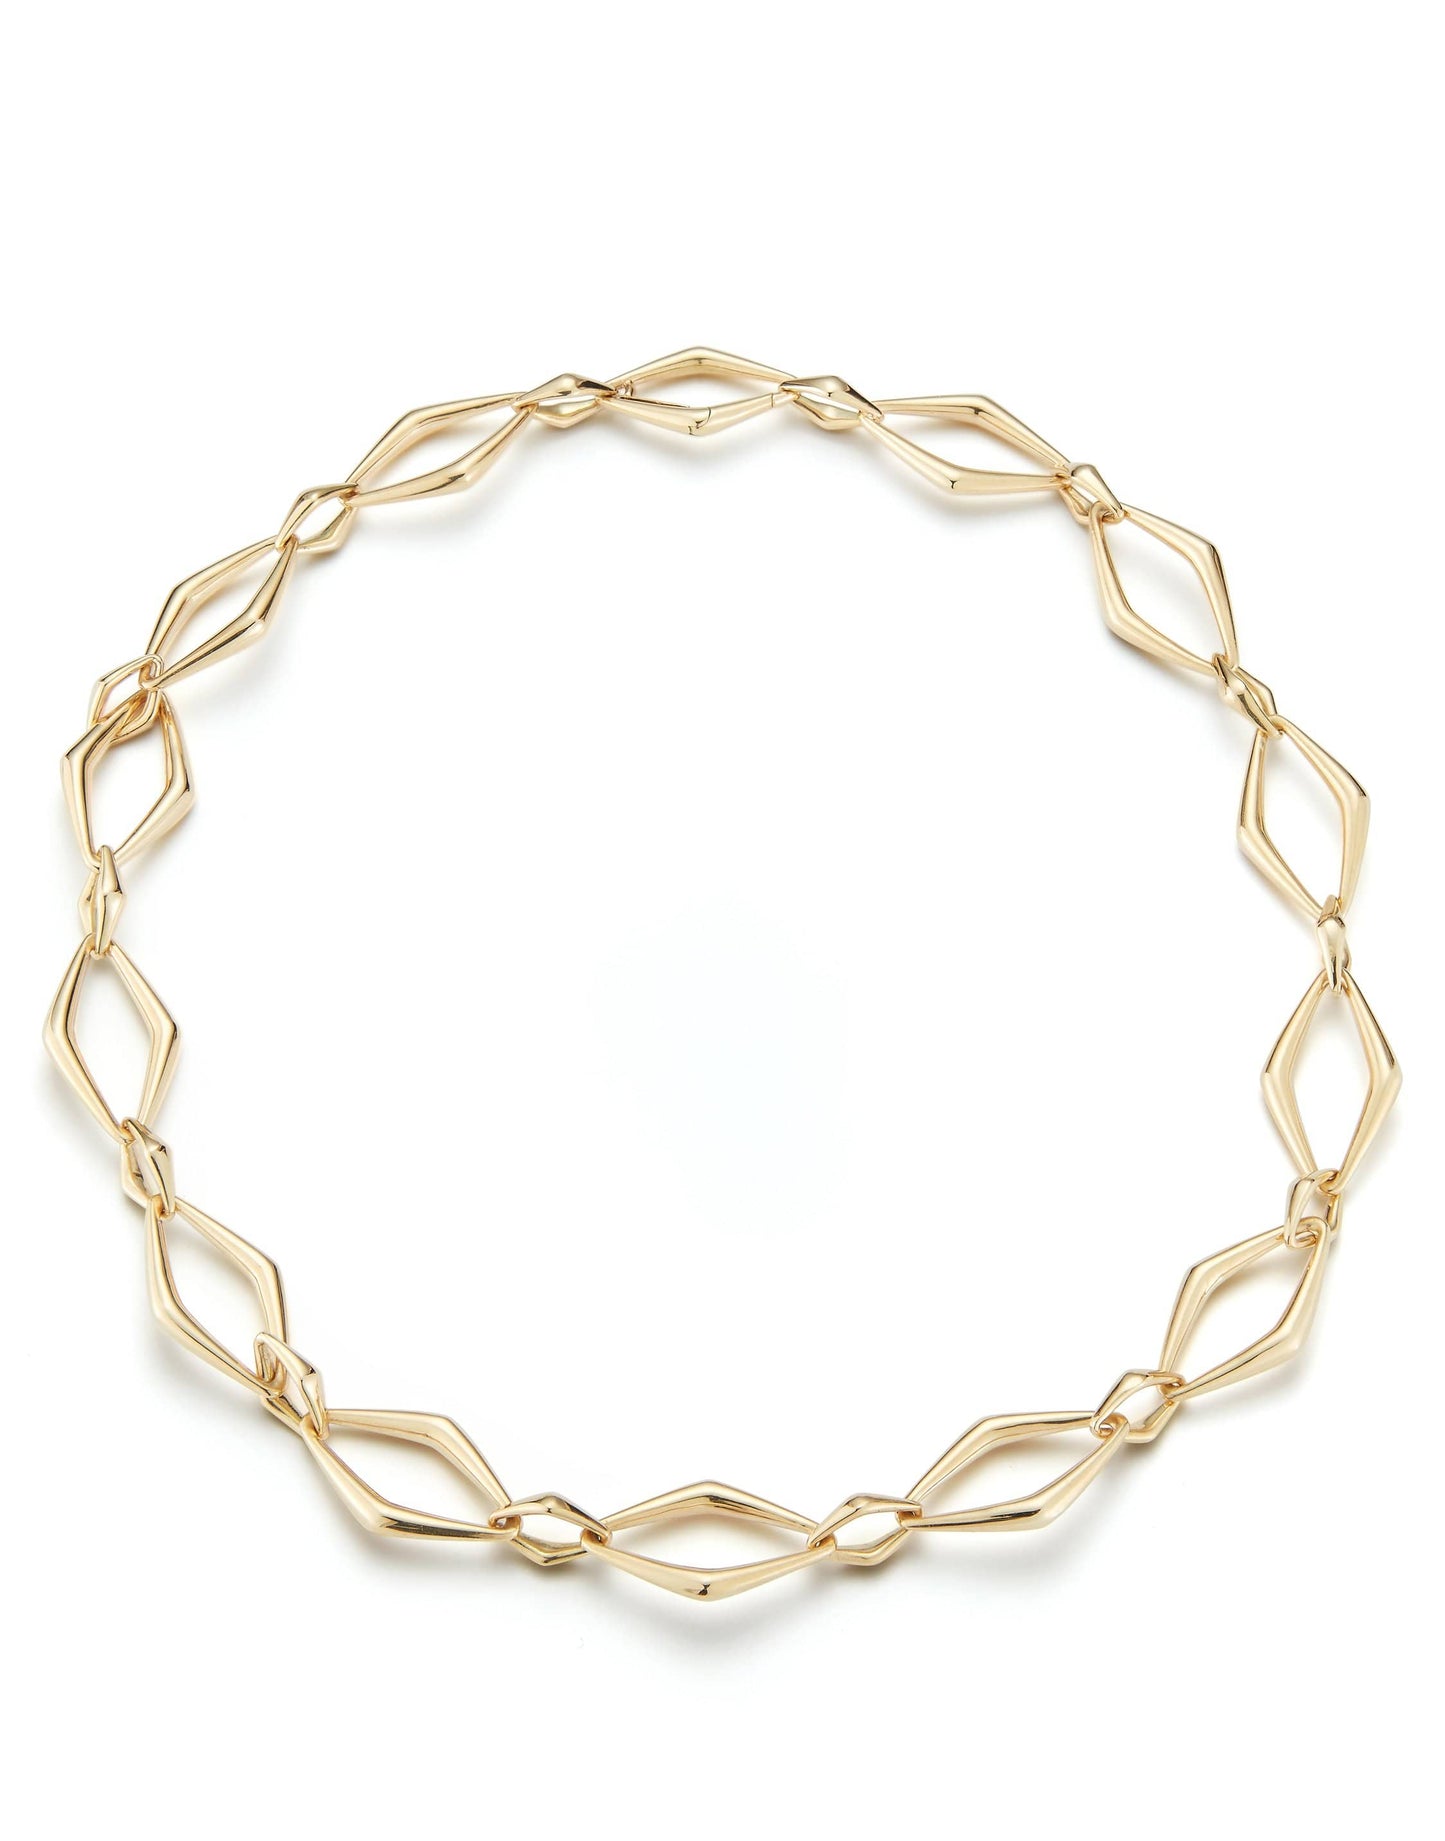 PARULINA-Dressed to Kill Alternating Gold Link Necklace-YELLOW GOLD